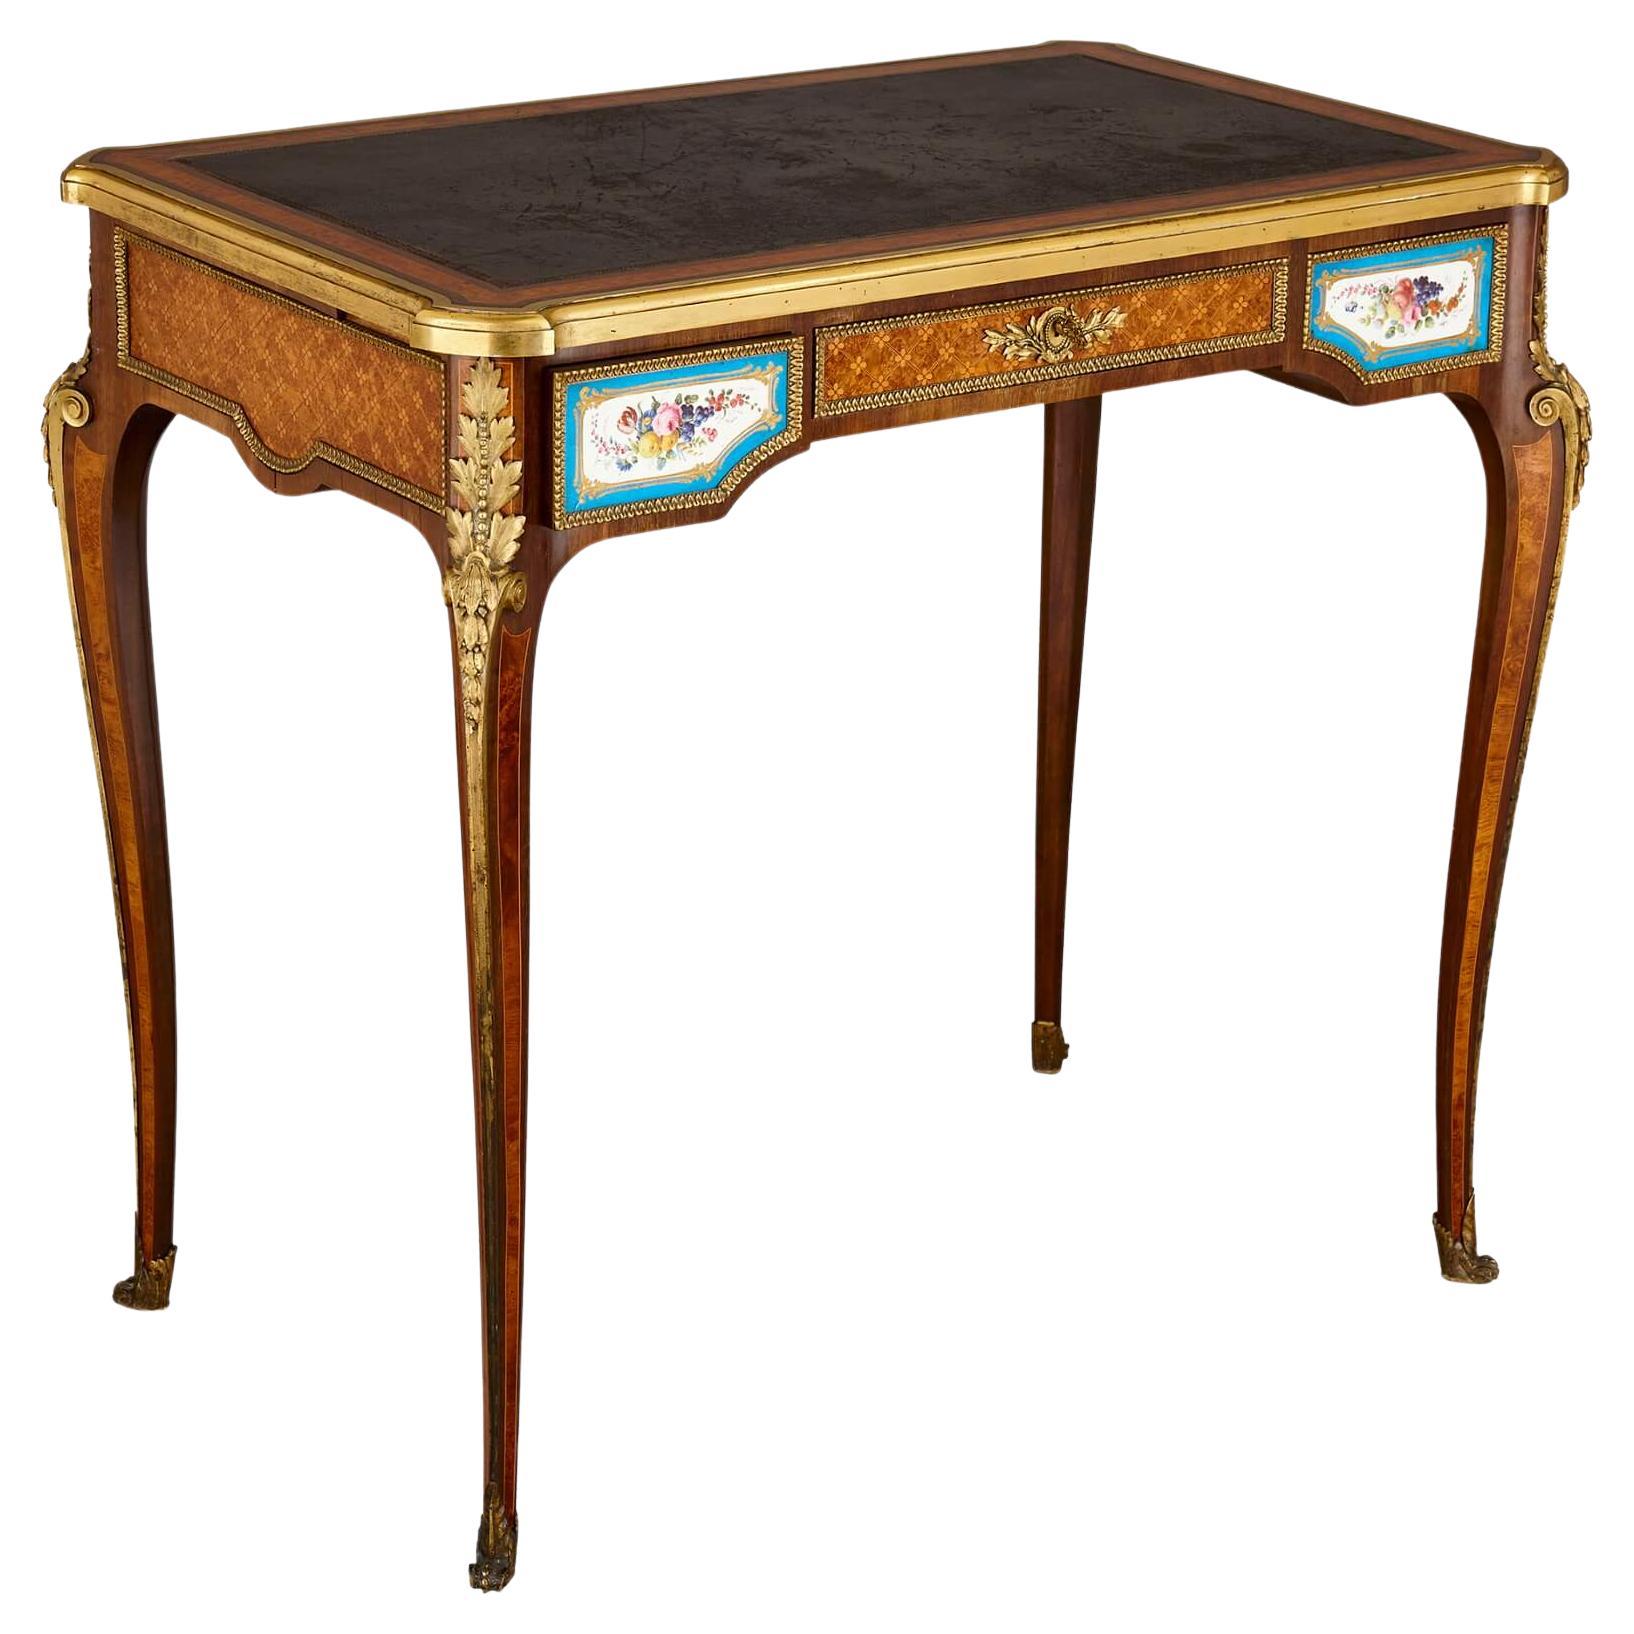 Very Fine Ormolu, Porcelain and Marquetry Writing Desk by Henry Dasson For Sale